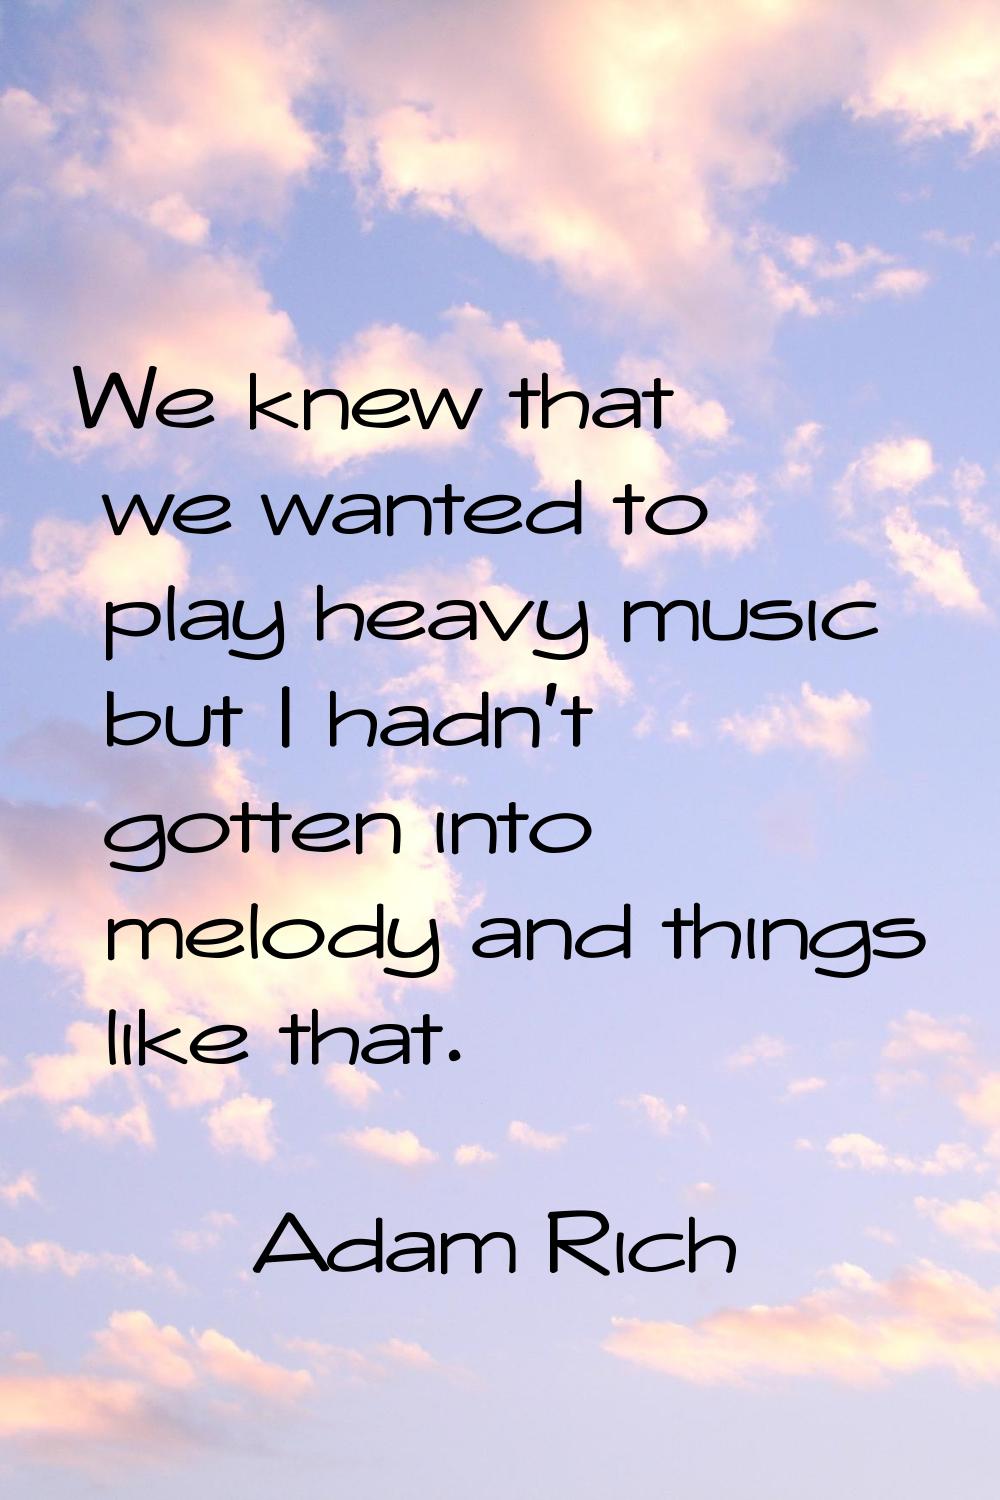 We knew that we wanted to play heavy music but I hadn't gotten into melody and things like that.